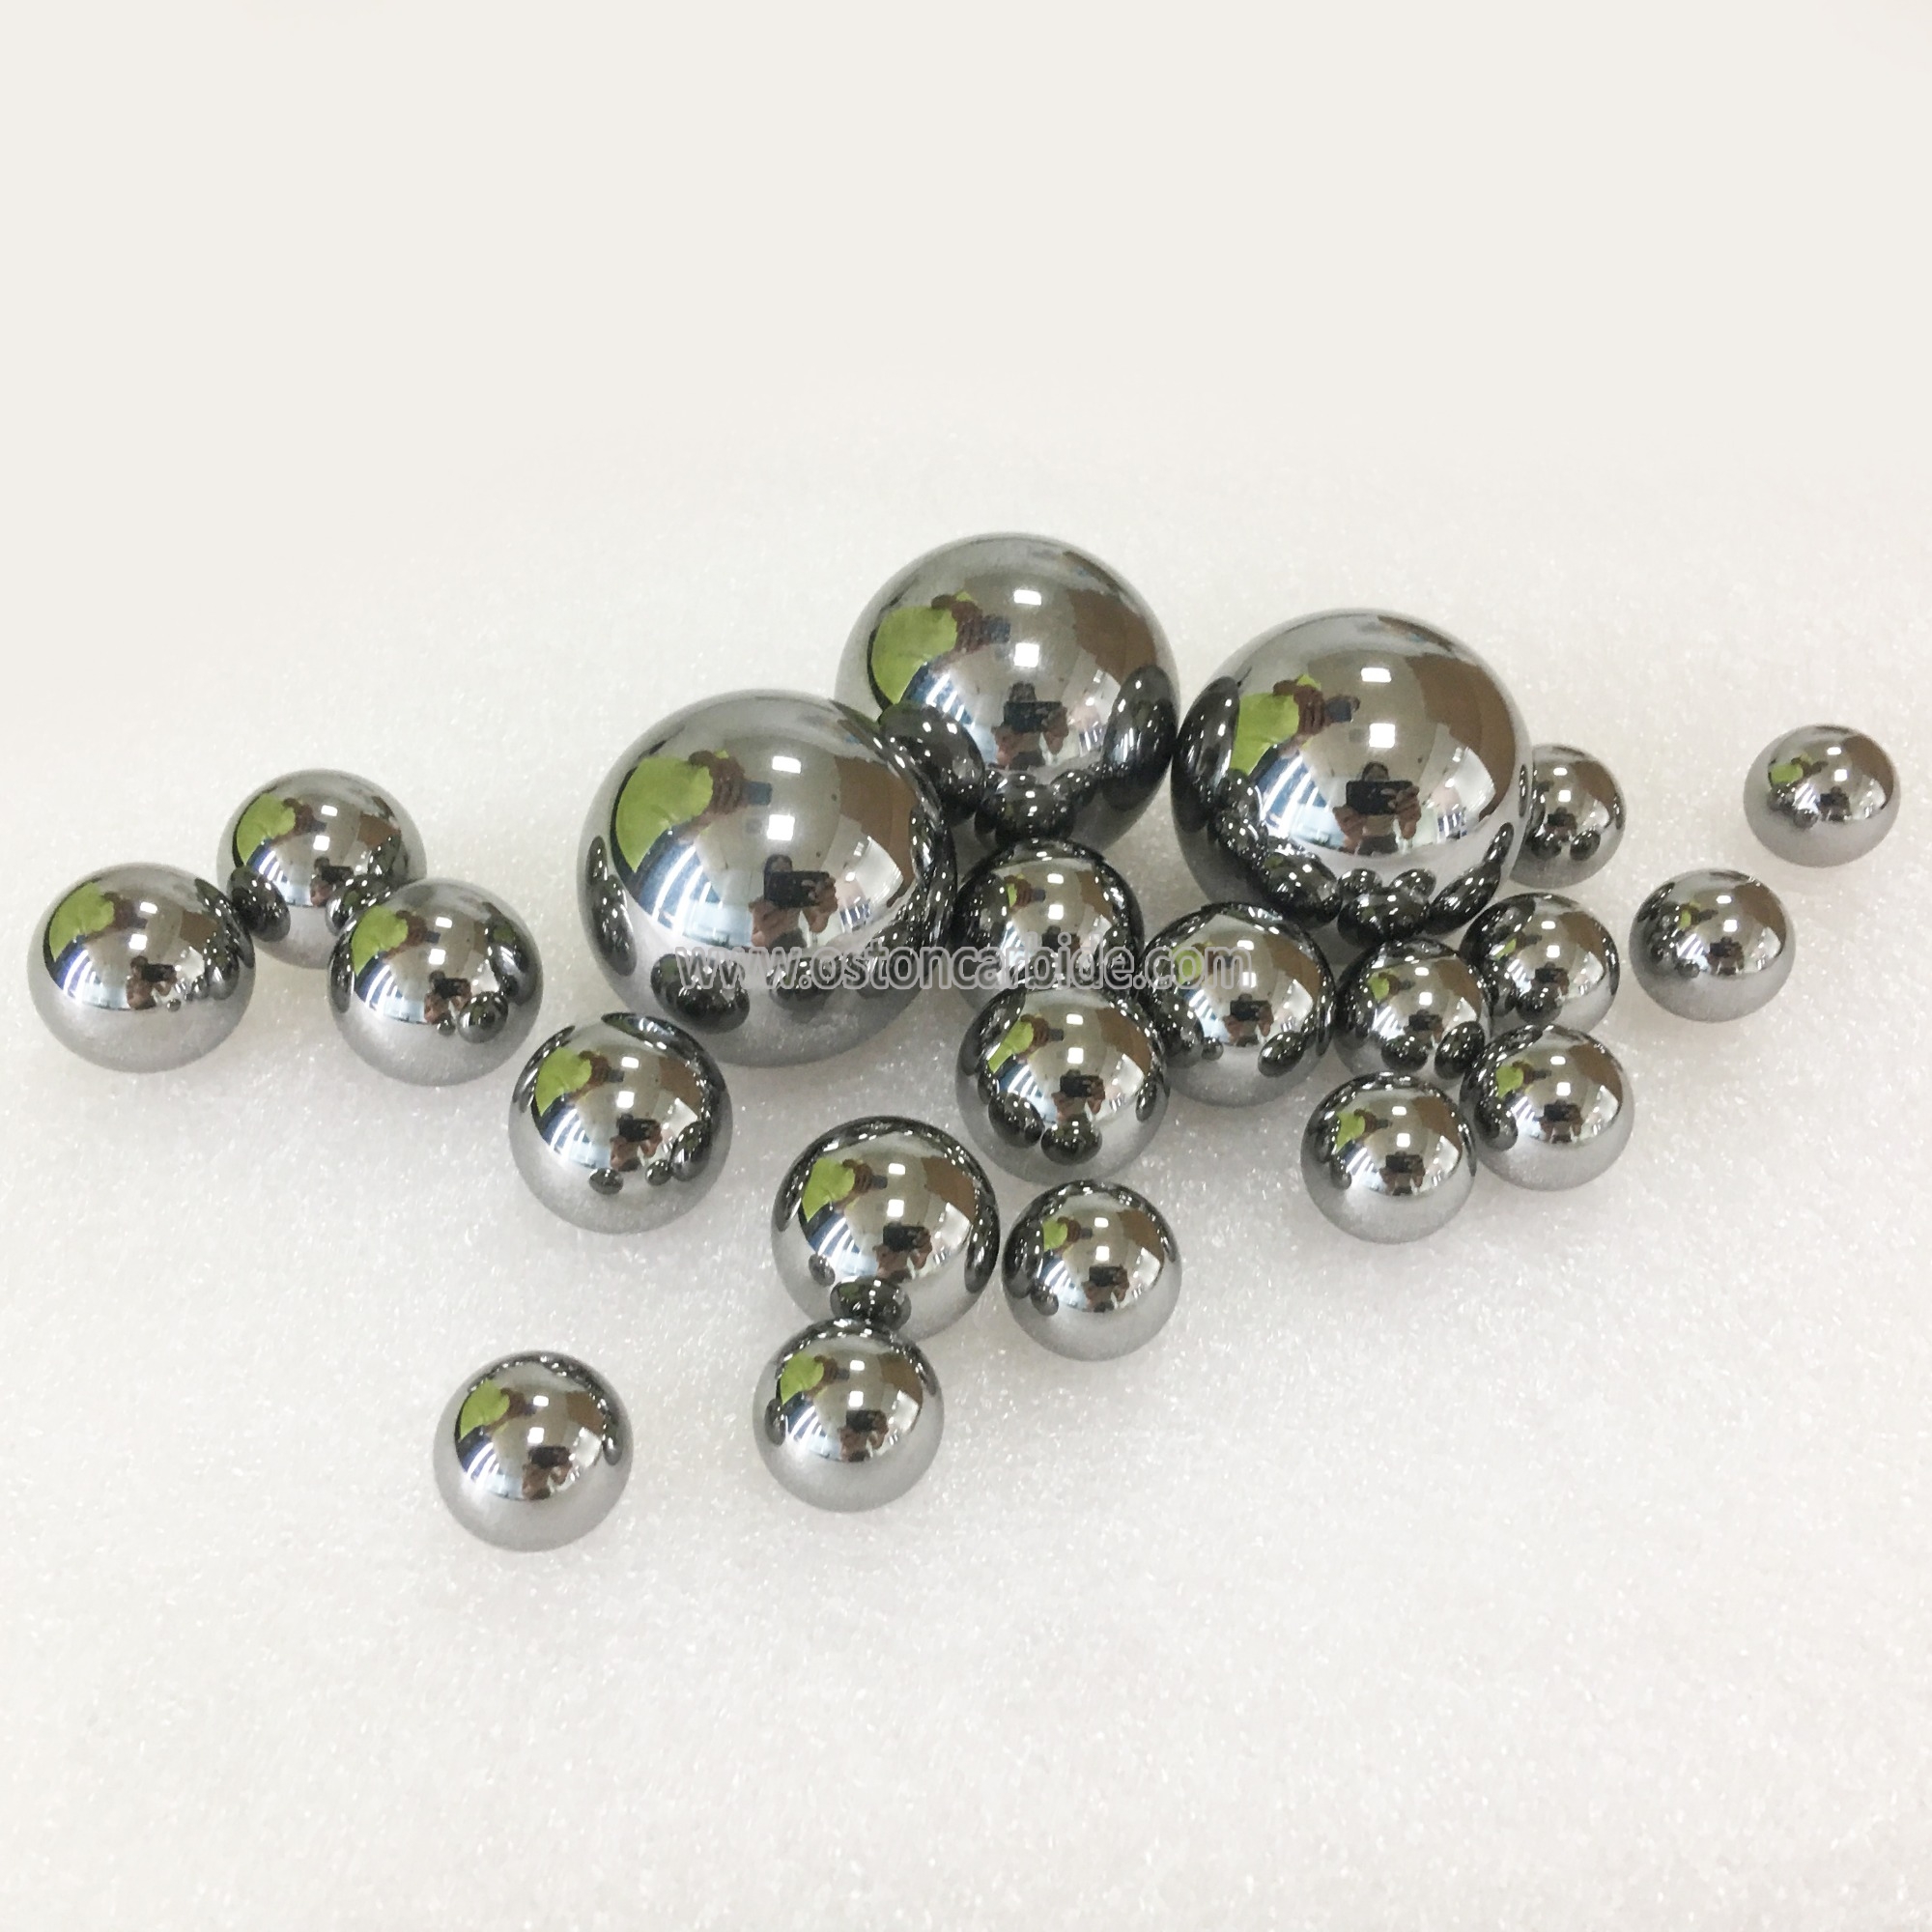  Polished Tungsten Carbide Spheres